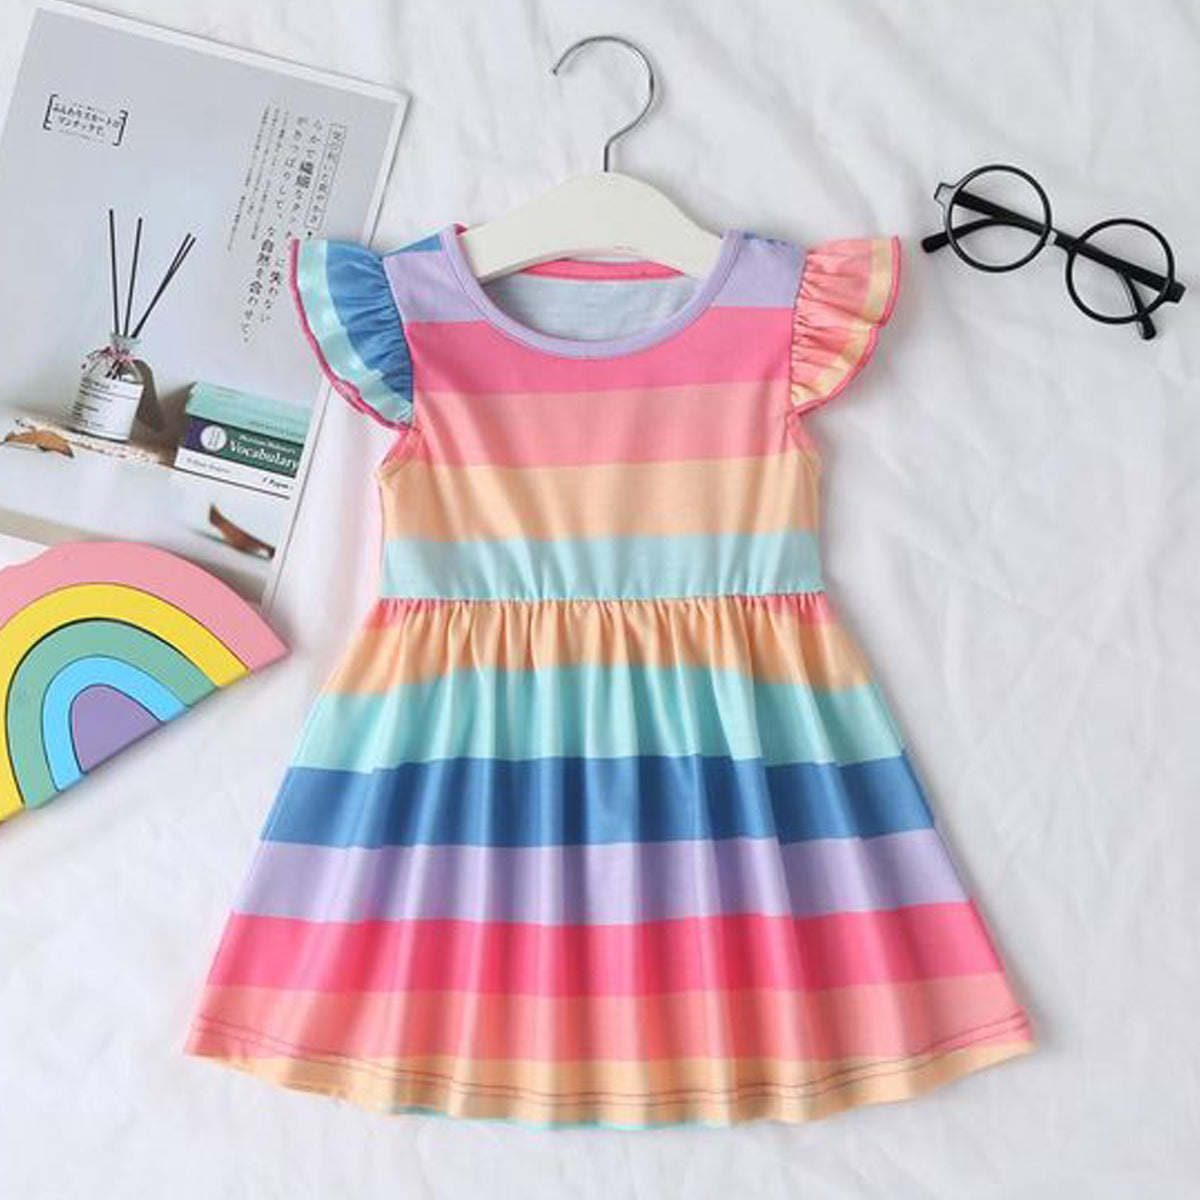 Stylish BabyGirl's White Pocket & Yellow Multi Lining & Multicolor Lining Dresses_Frocks 3 Combo for Kids.